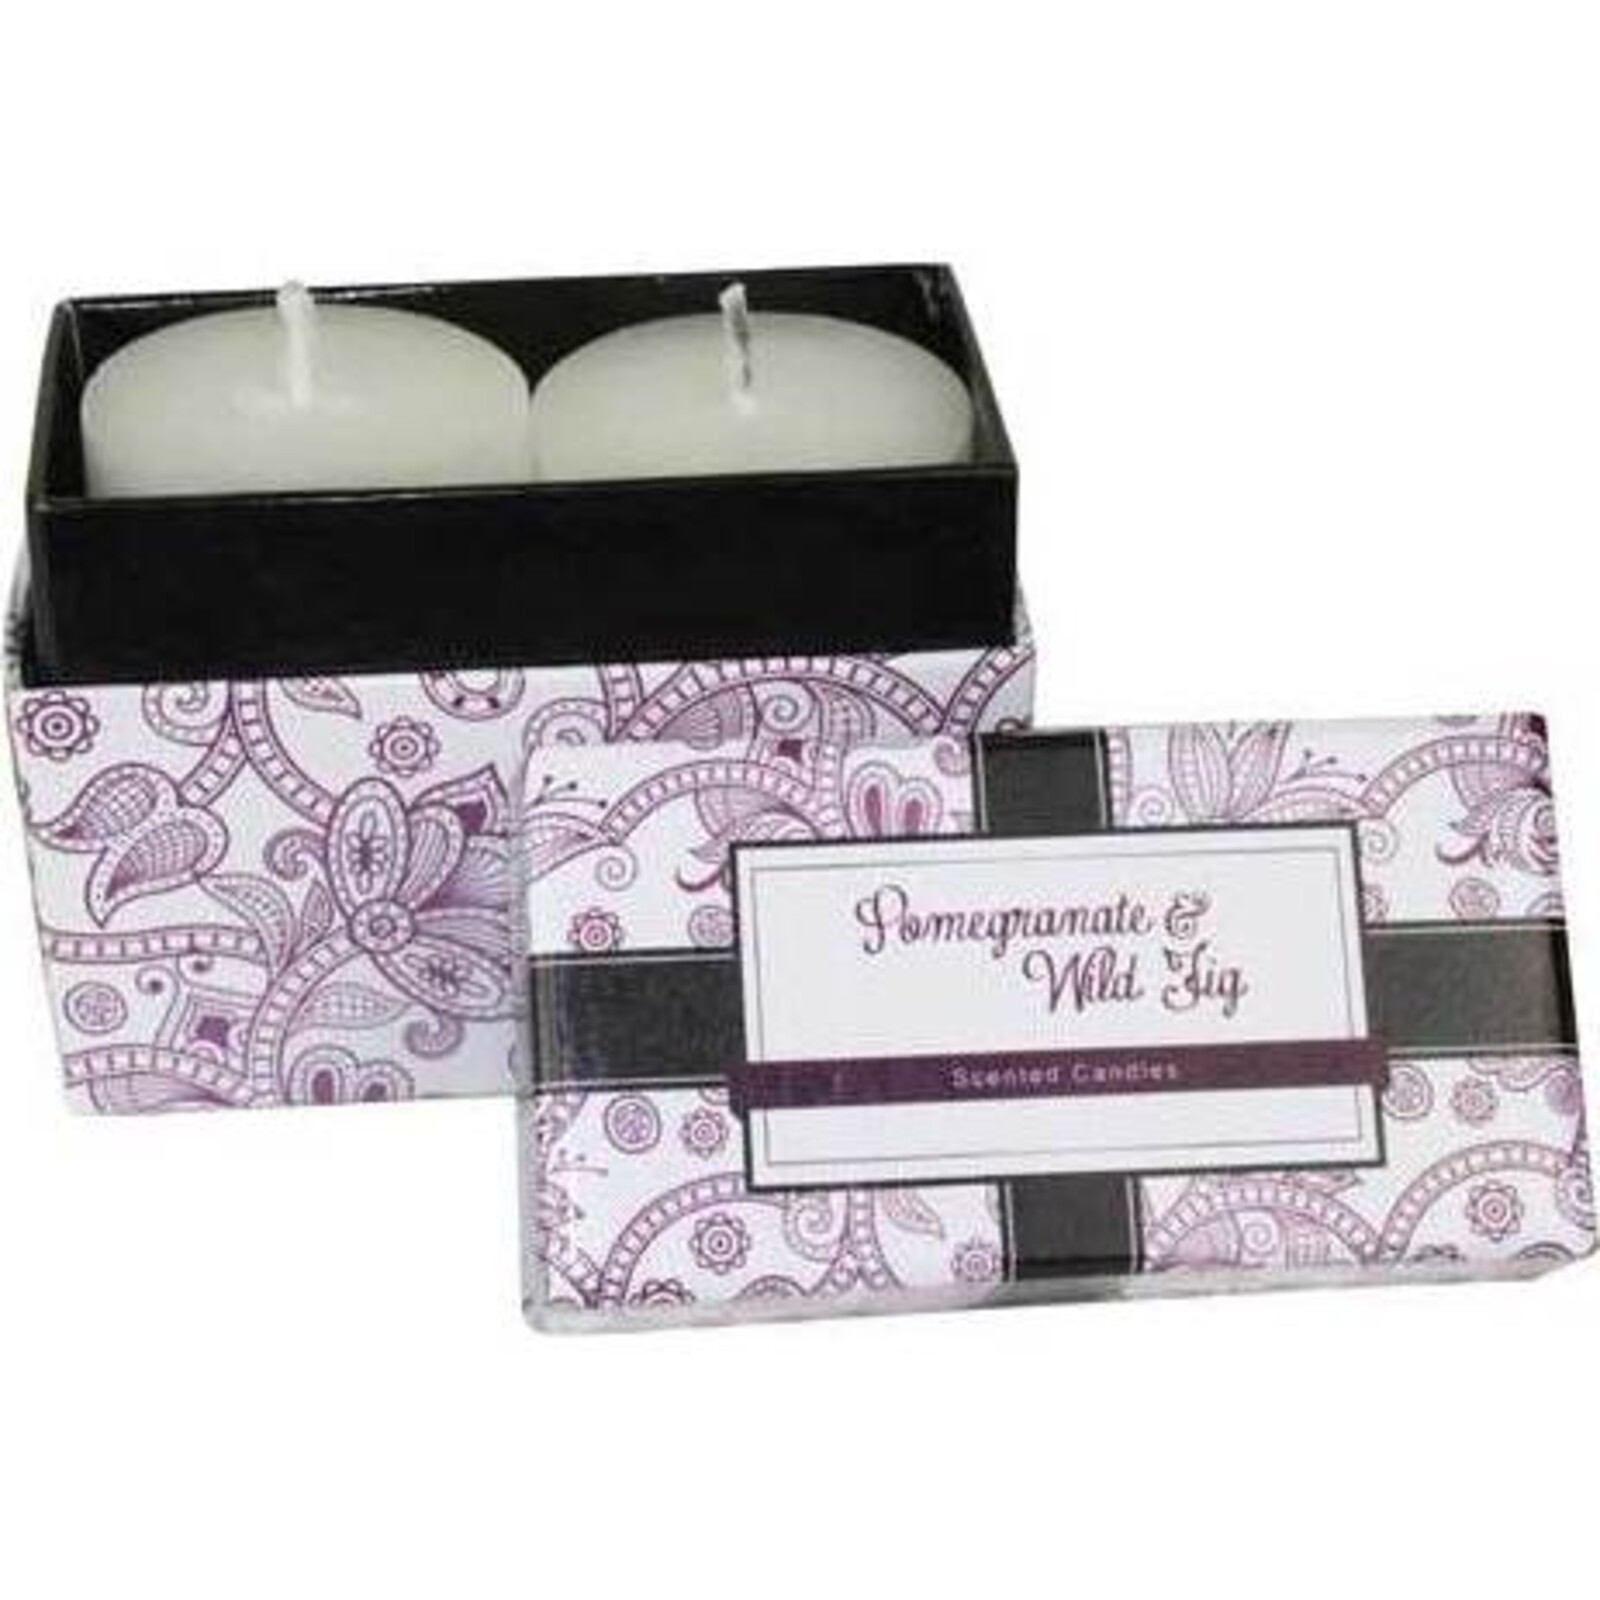 Pomegranate & Wild Fig Boxed candle S/2